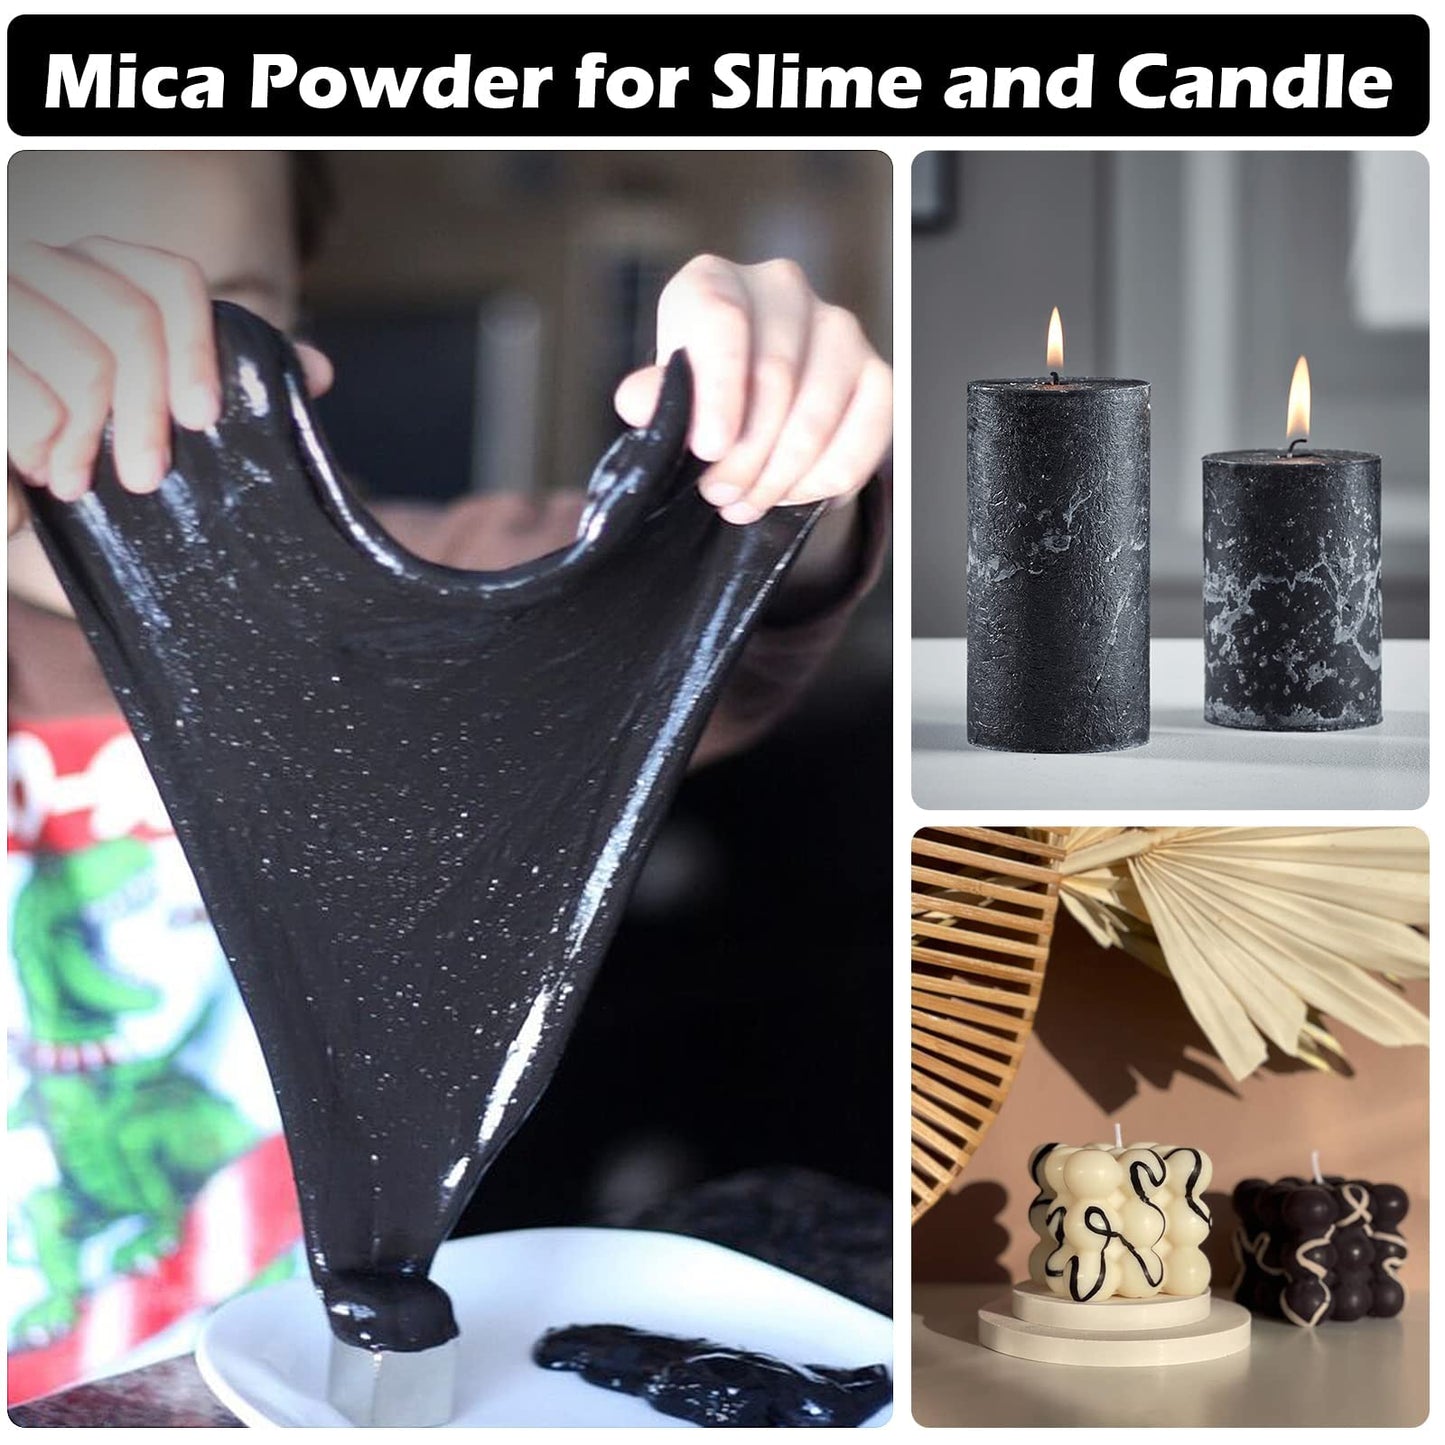 HTVRONT Black Mica Powder for Epoxy Resin - 3.5 oz (100g) Easy to Mix Resin Pigment Powder, Nature Non-Toxic Mica Powder for Soap Making, Candle